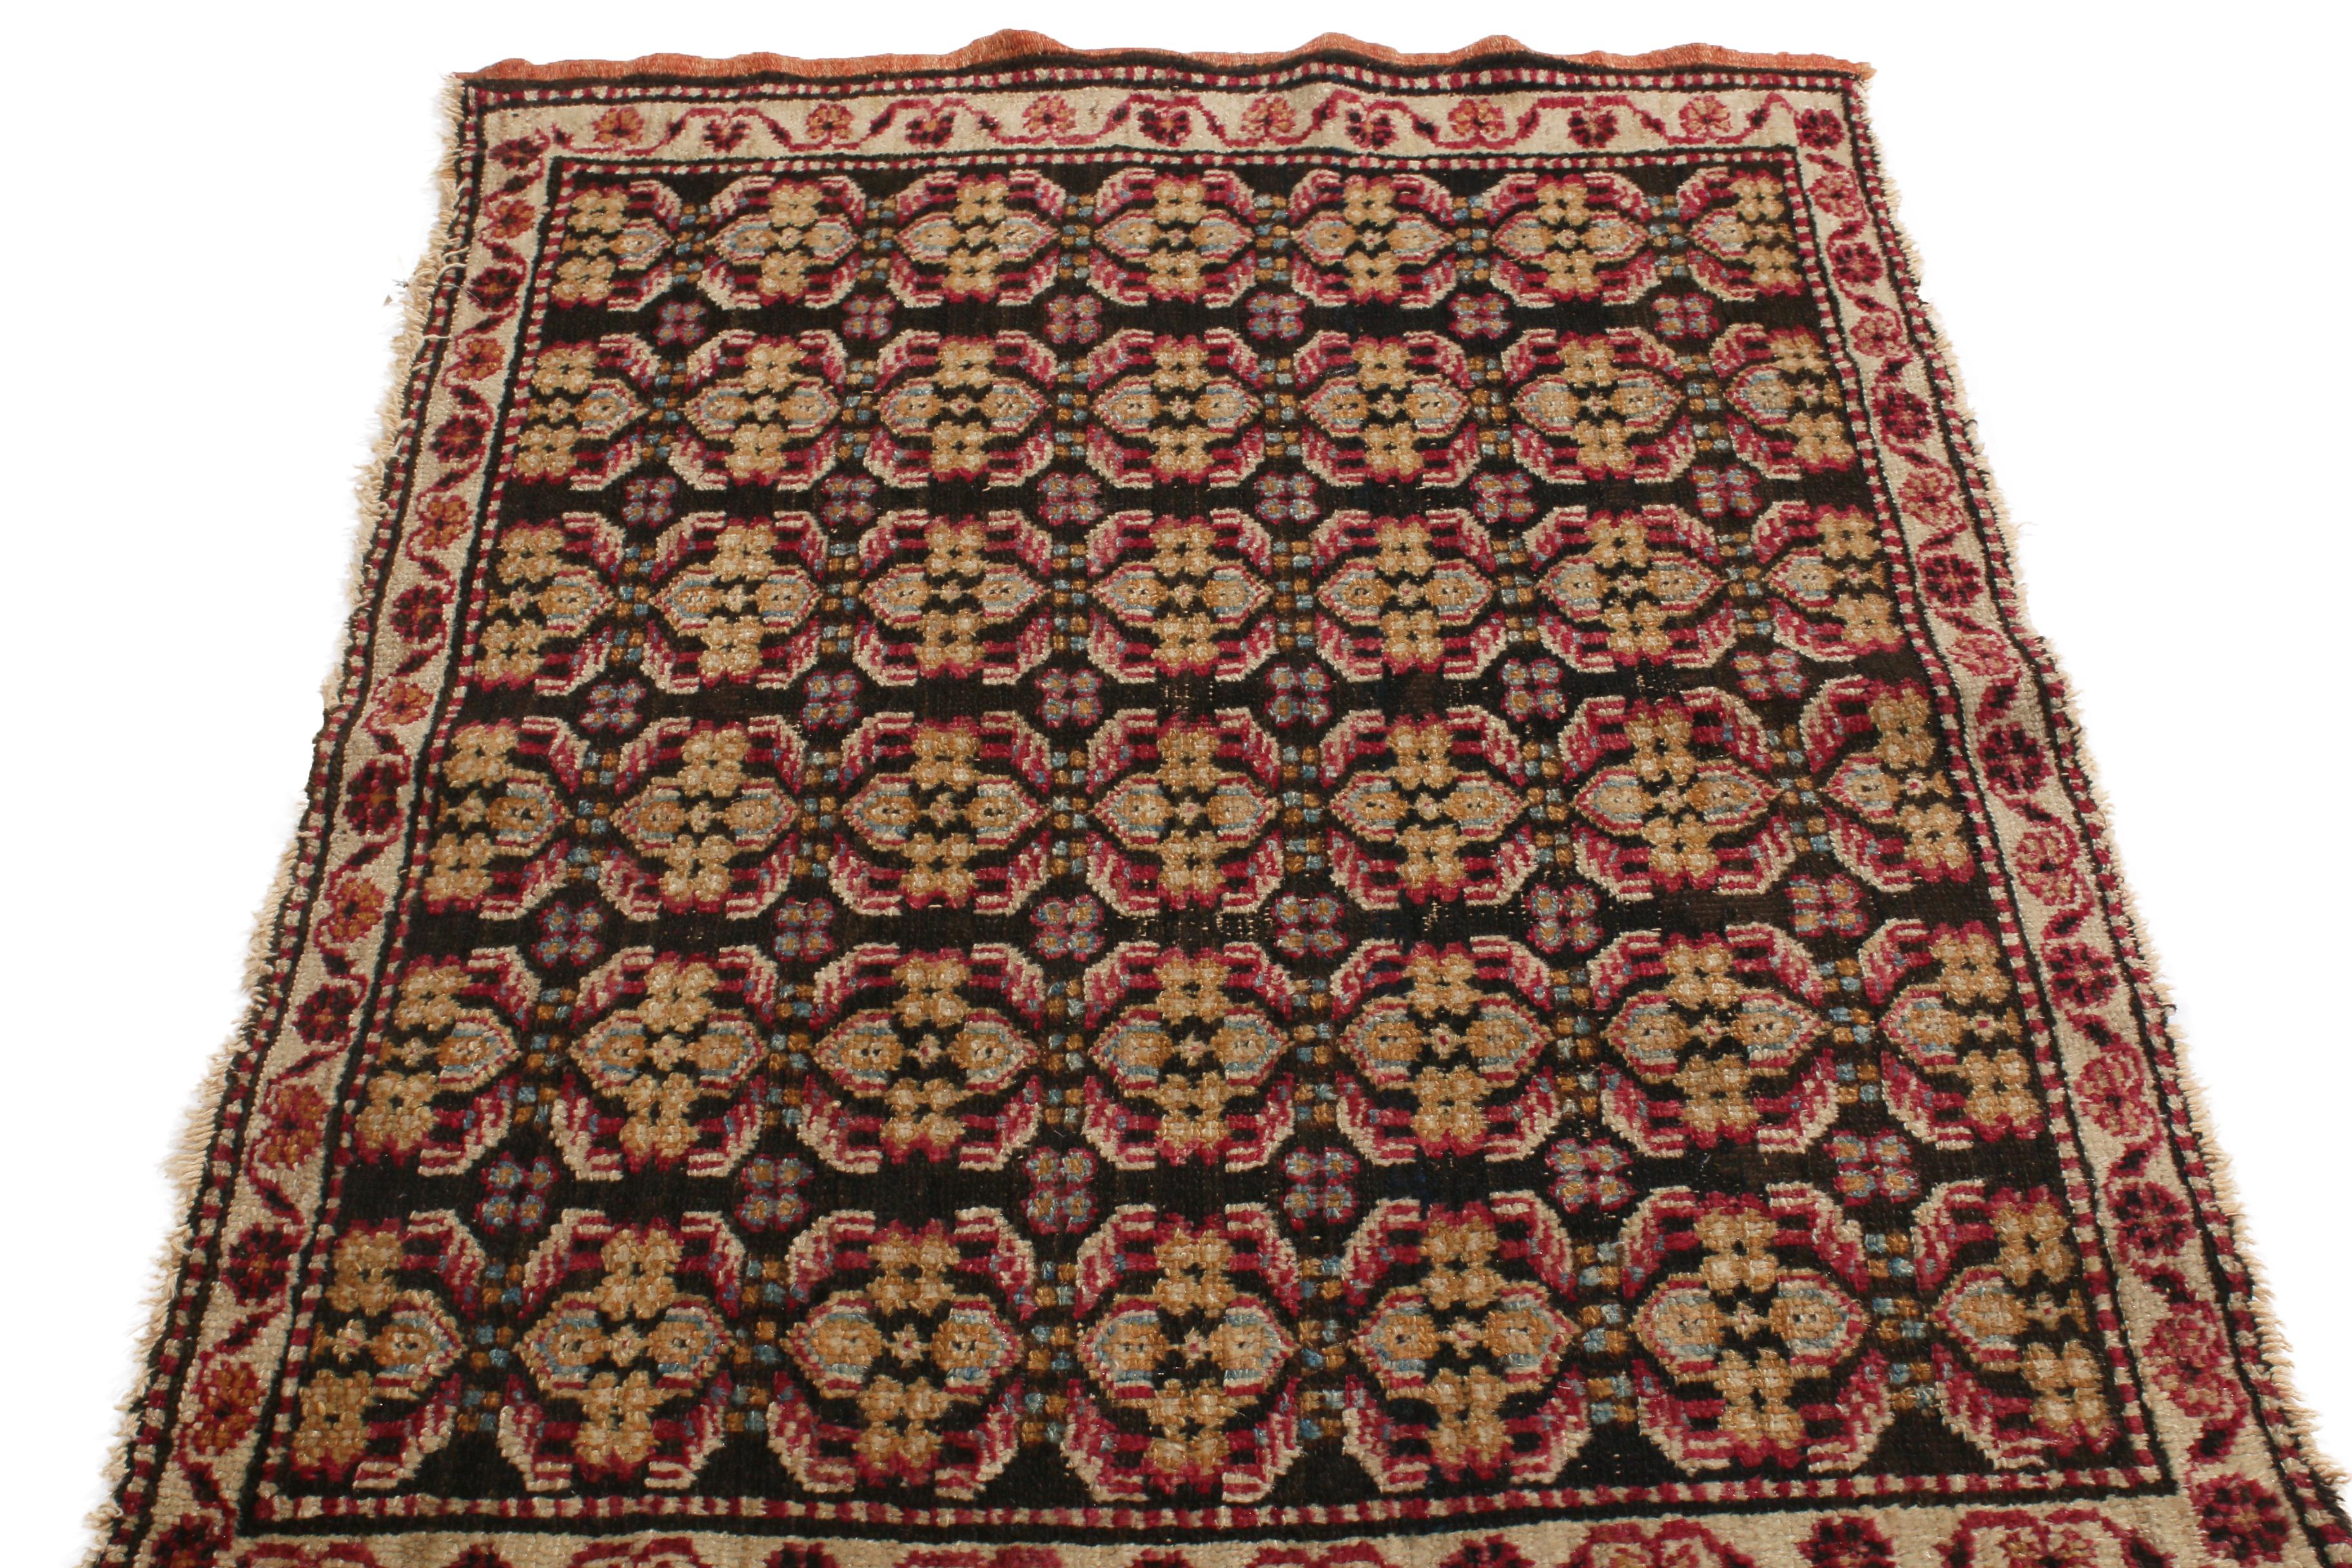 Indian Antique Agra Geometric Beigr and Red Wool Floral Rug